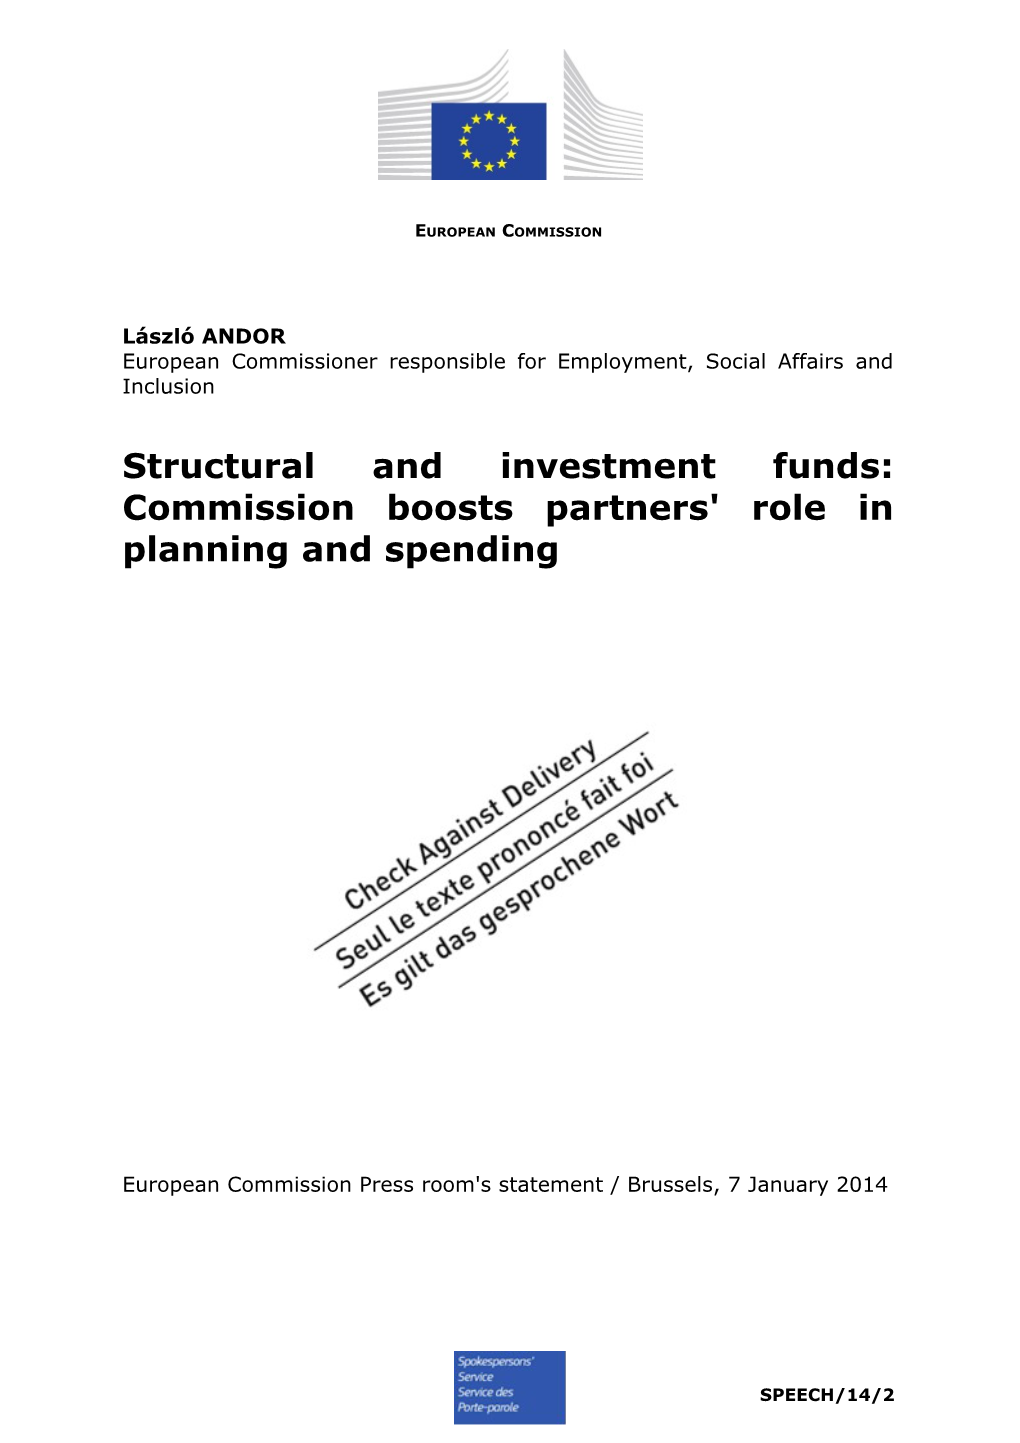 Structural and Investment Funds: Commission Boosts Partners' Role in Planning and Spending